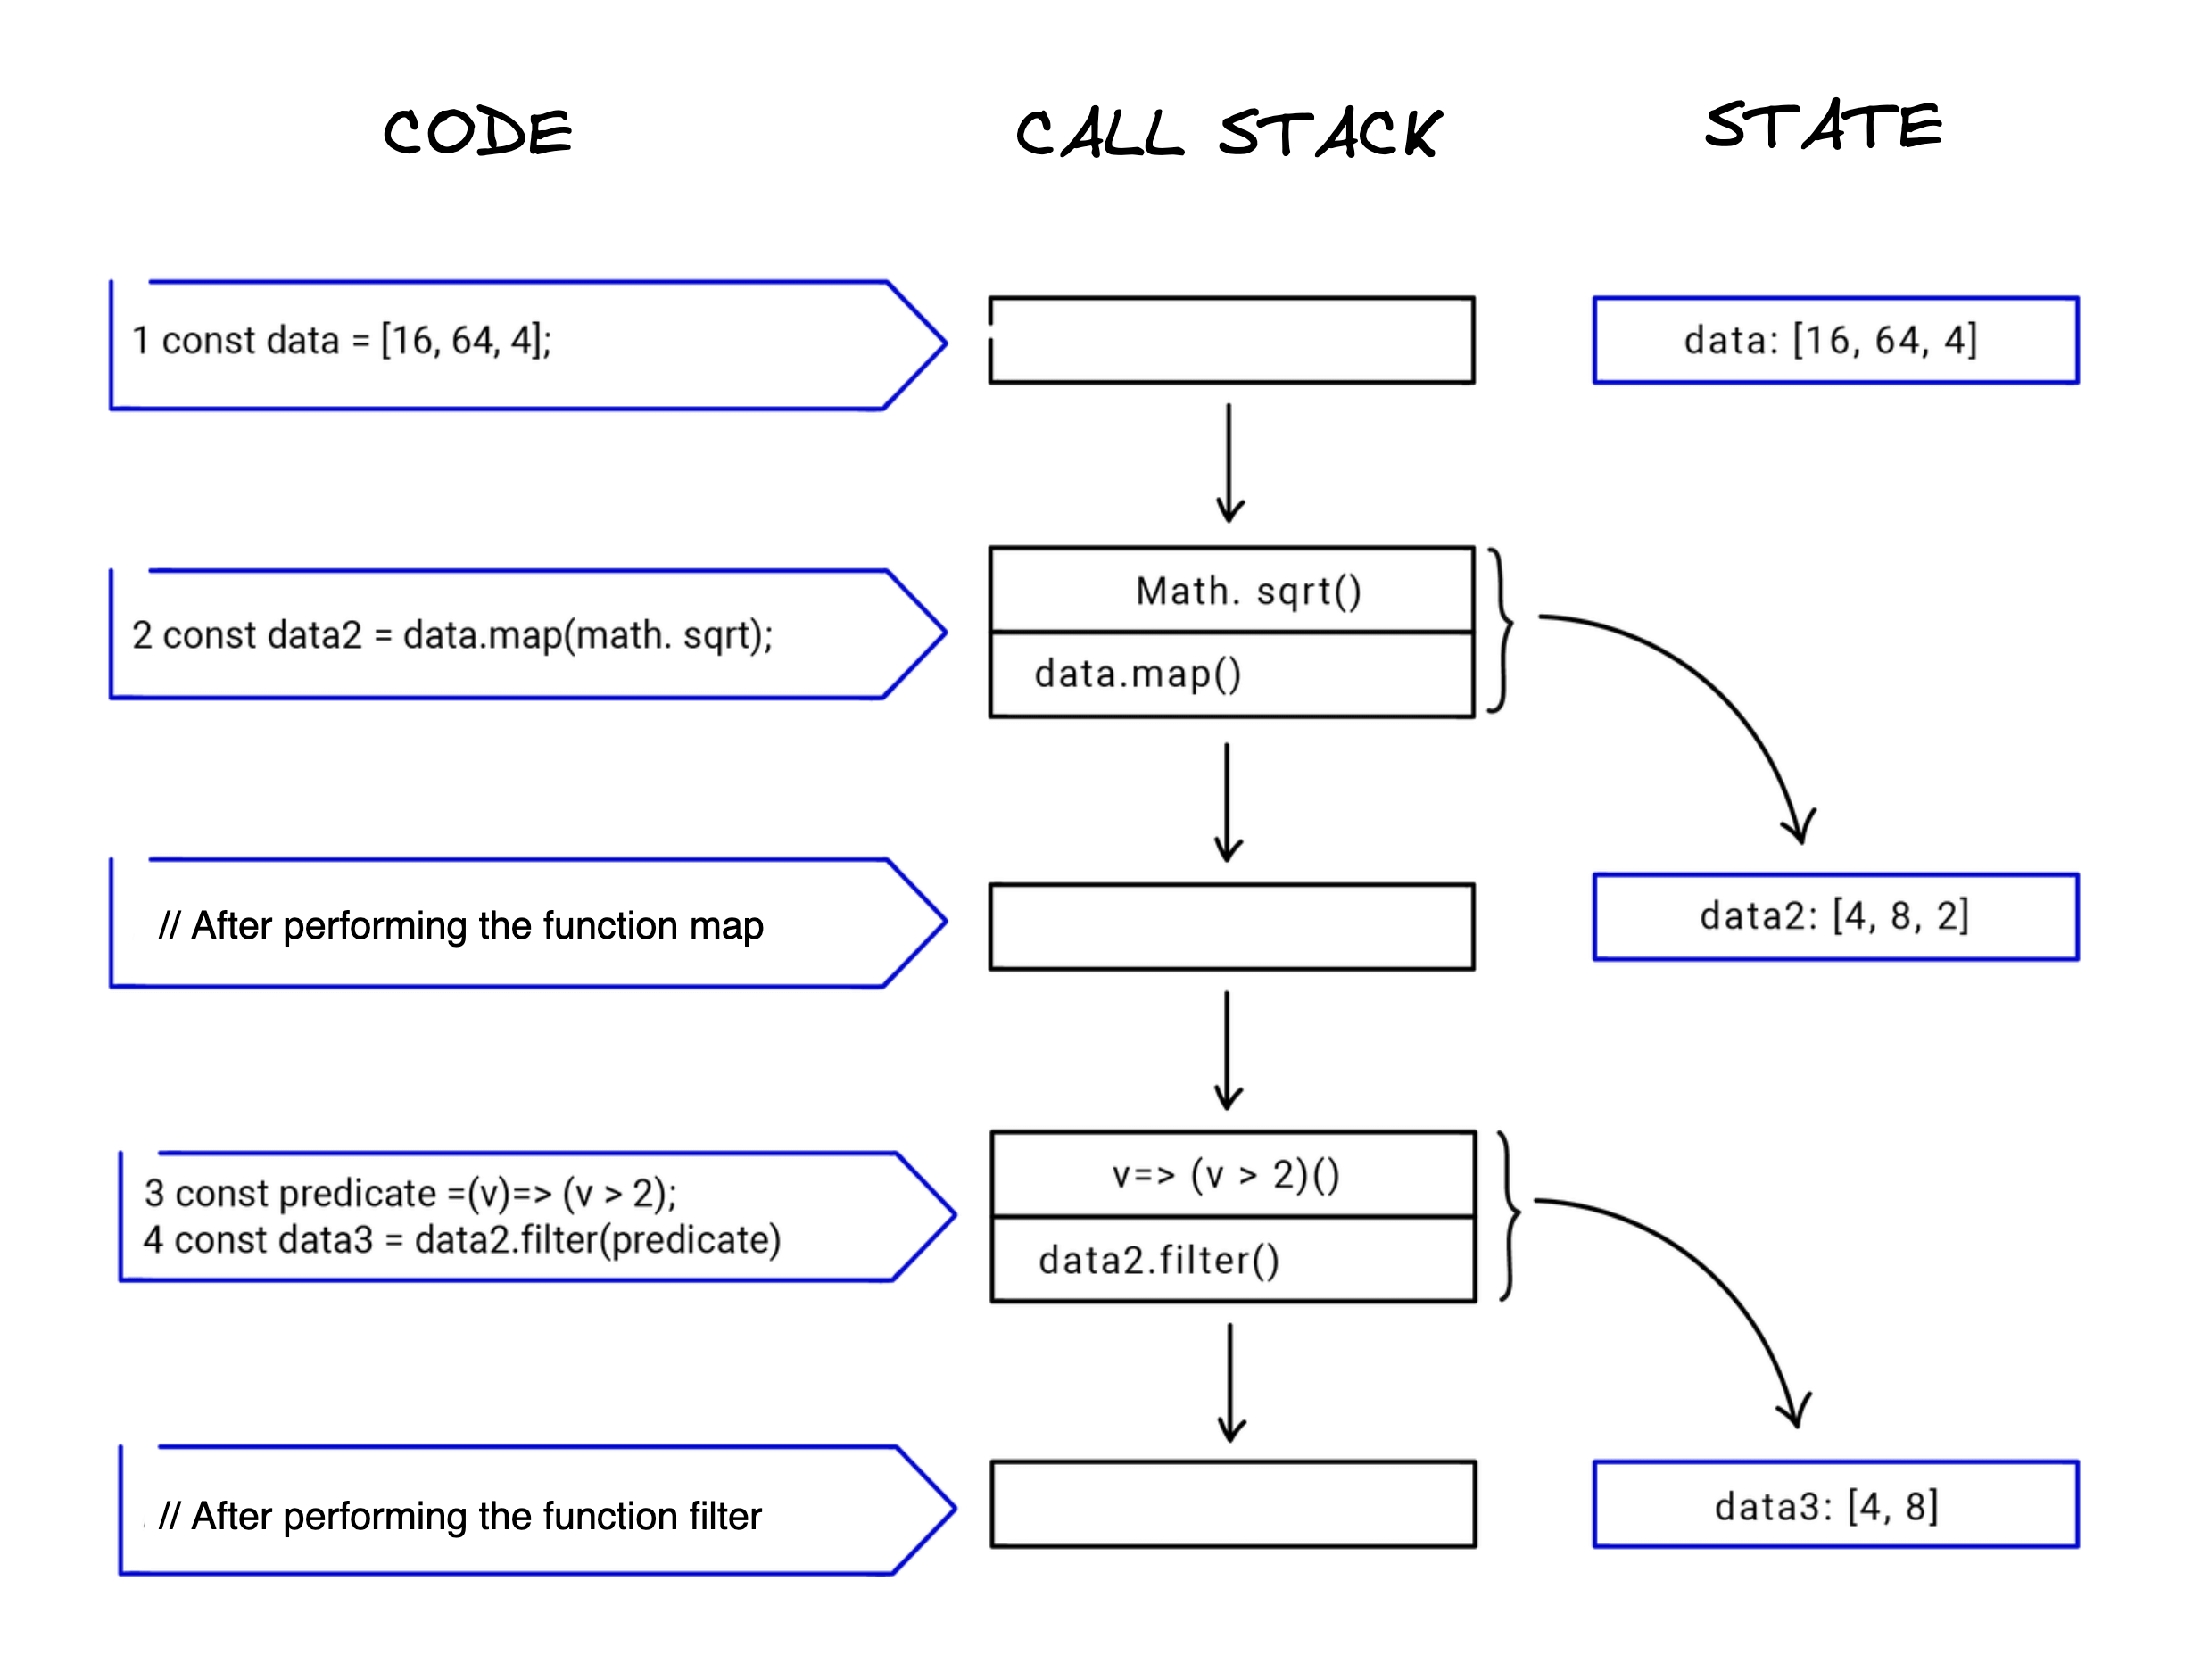 Call-stack